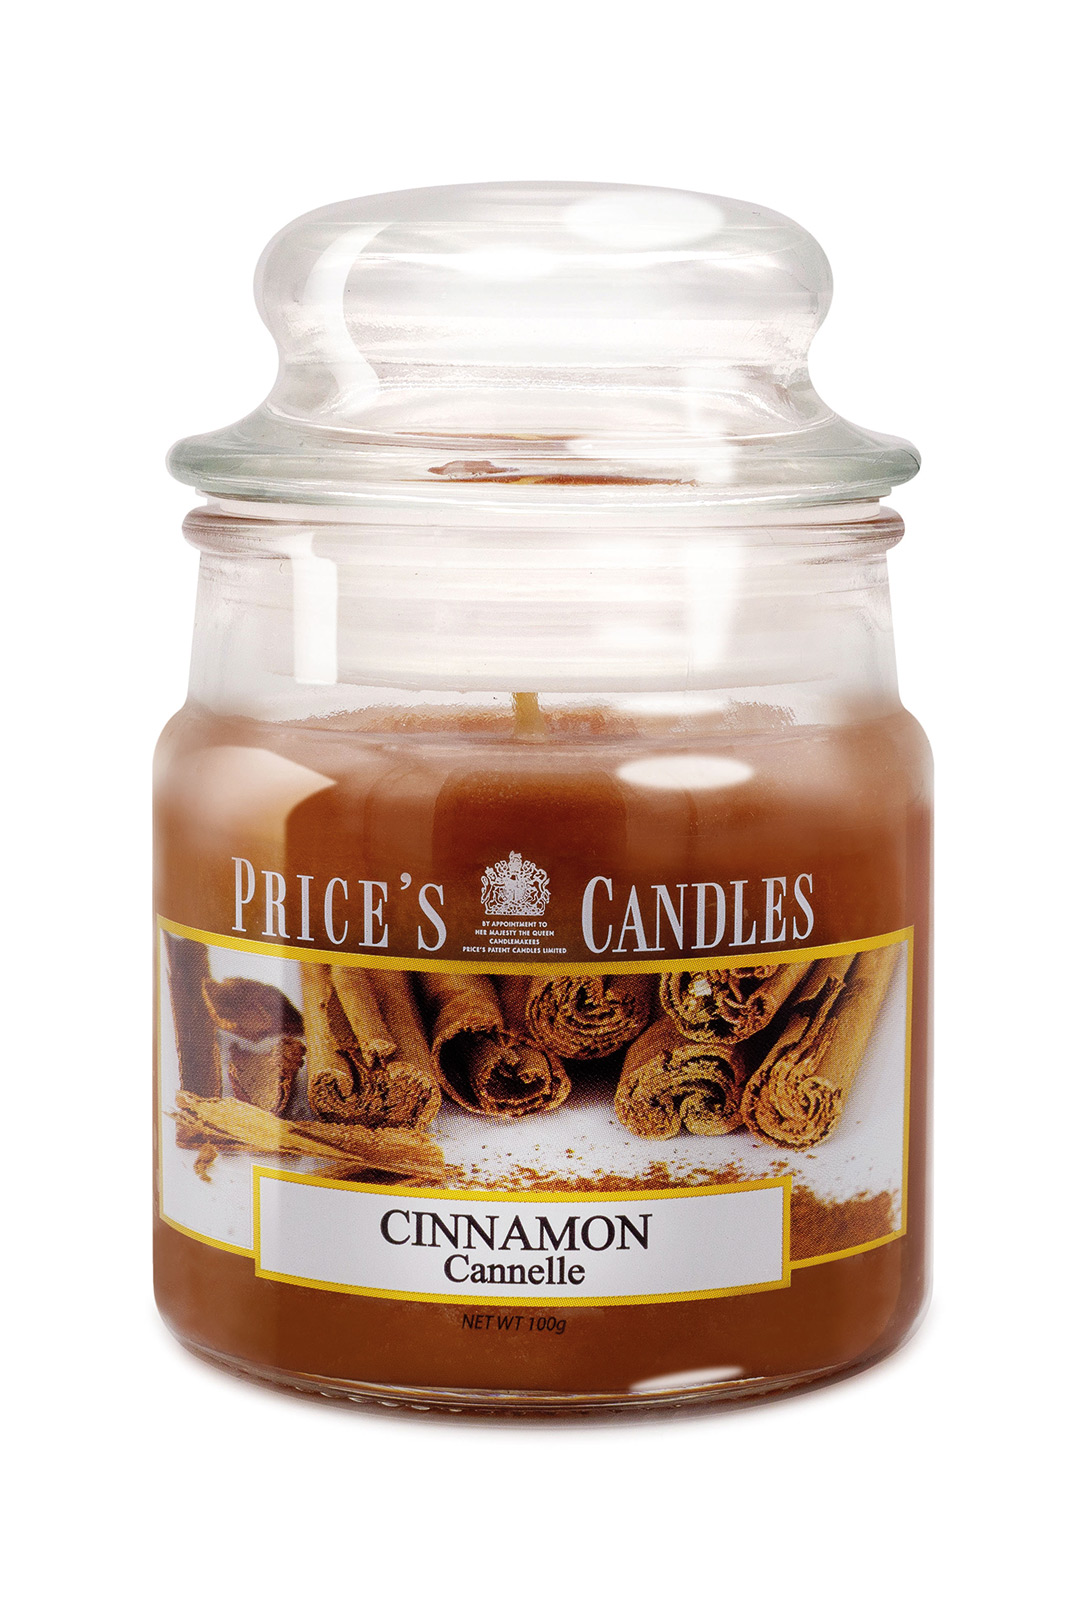 Prices Candle "Cinnamon" 100g  